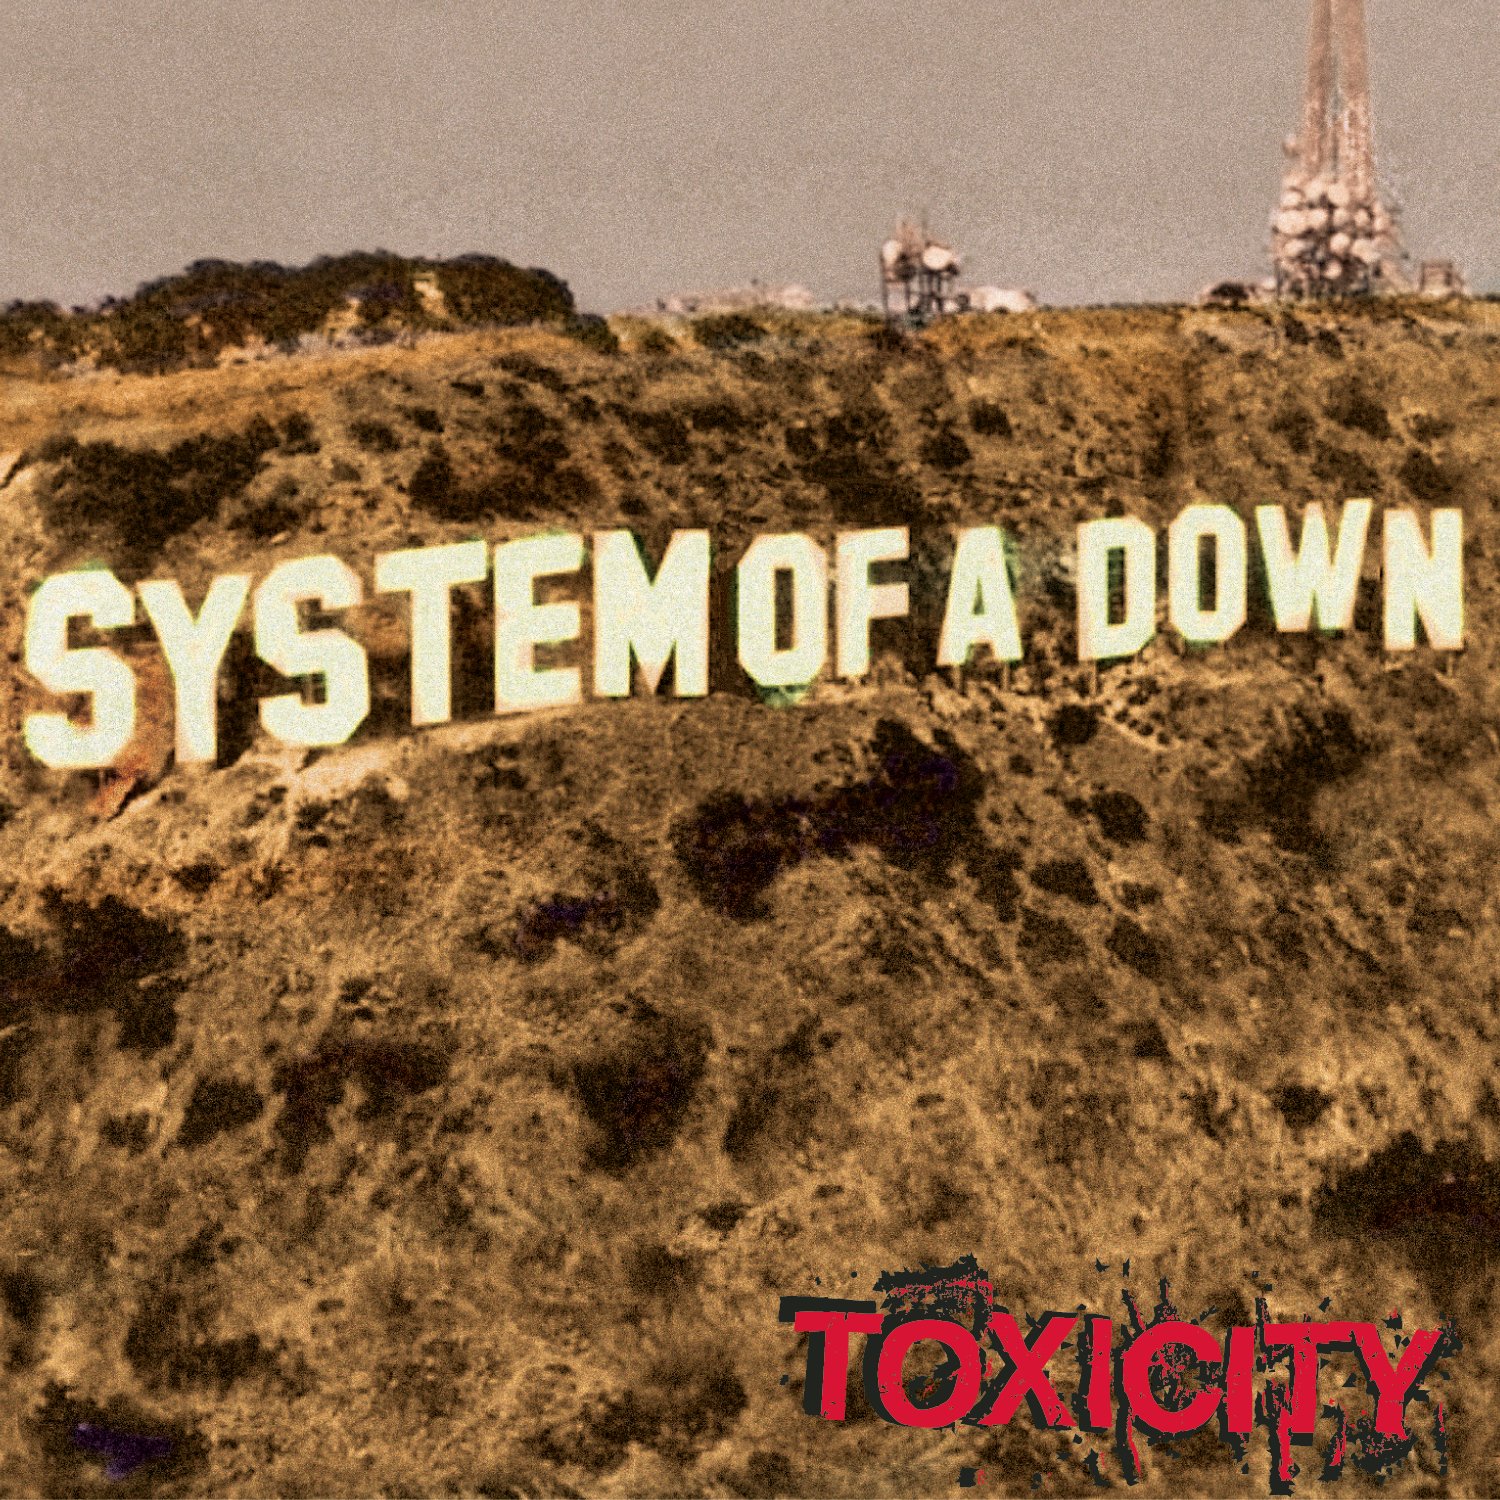 50 Years, 50 Albums 2001: System of a Down ‘Toxicity’